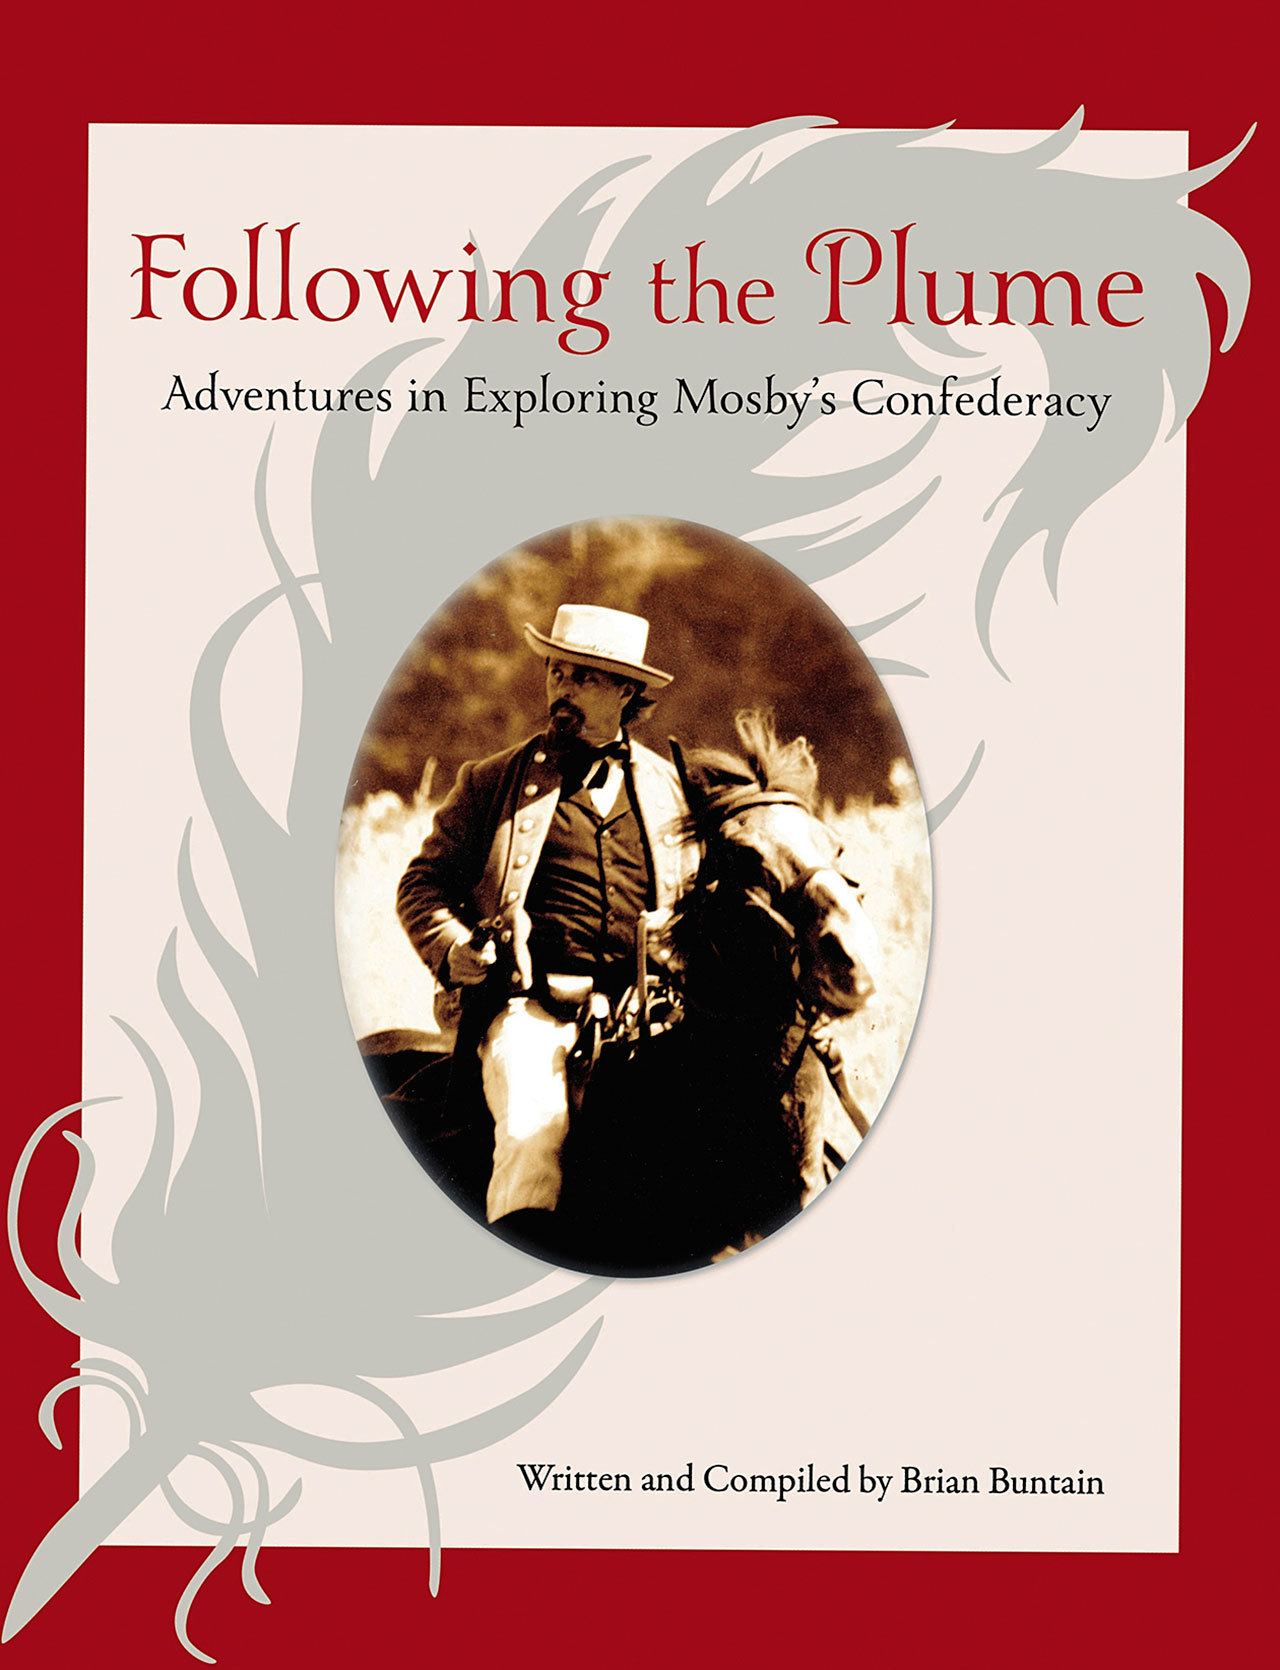 Harbor Art Gallery, 110 E. Railroad Ave., from 
4 p.m. to 7 p.m. Saturday will host a public reception for author Brian Buntain, whose book “Following the Plume” has recently been published.